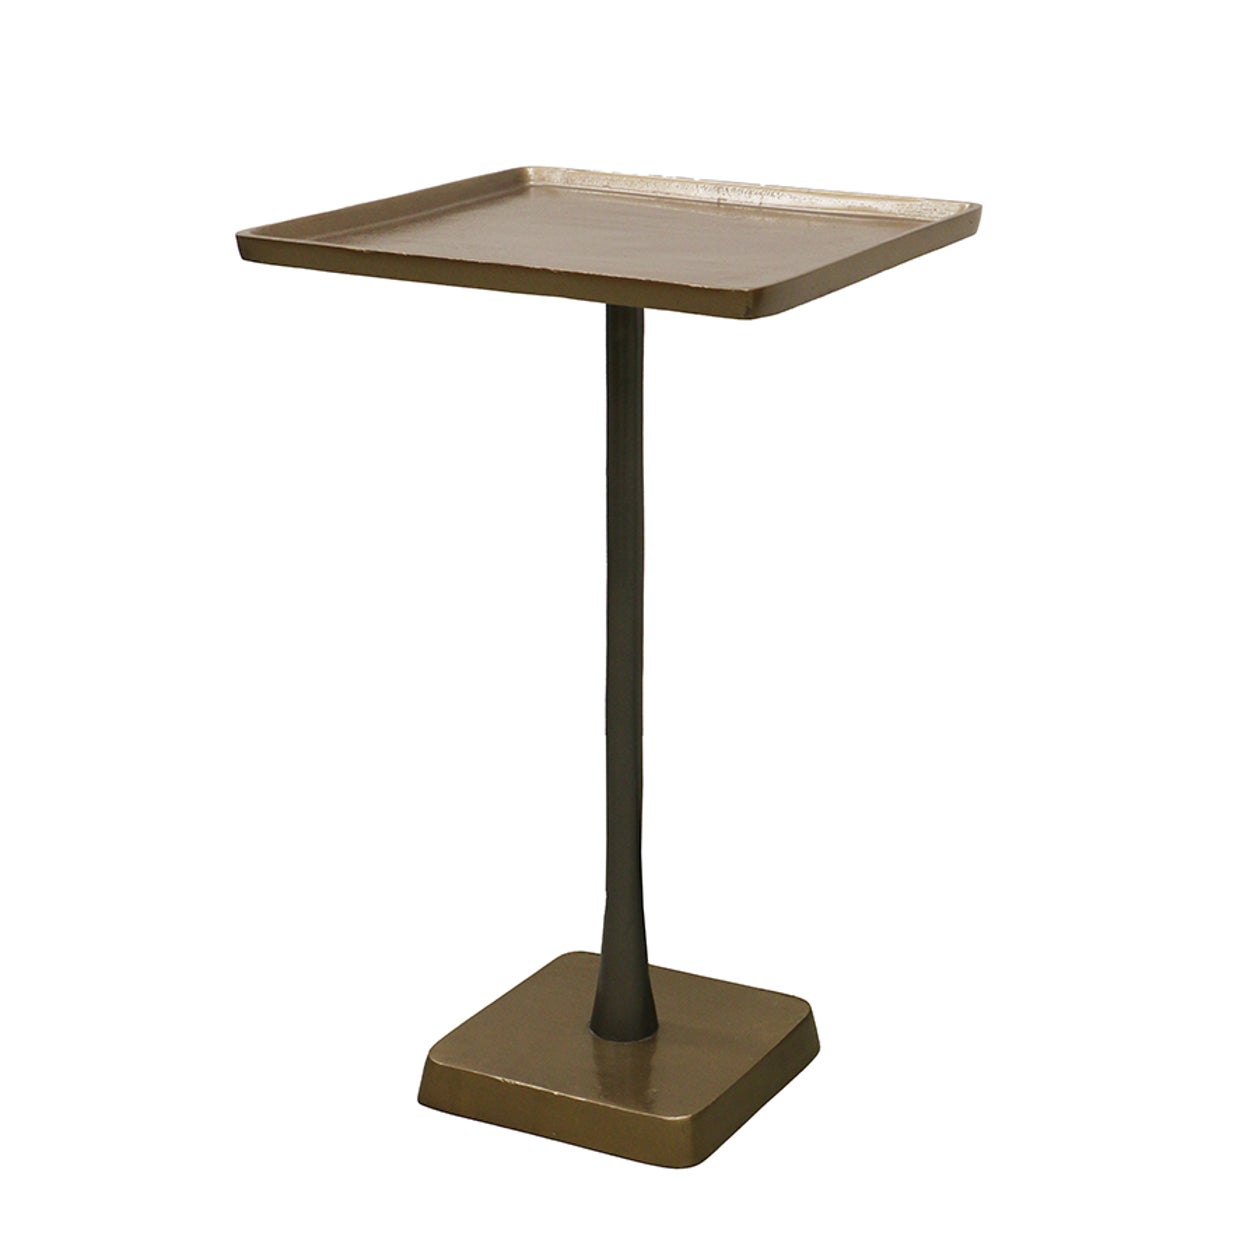 Marrakesh Square Occasional Pedestal Table in Brass Antique Finish